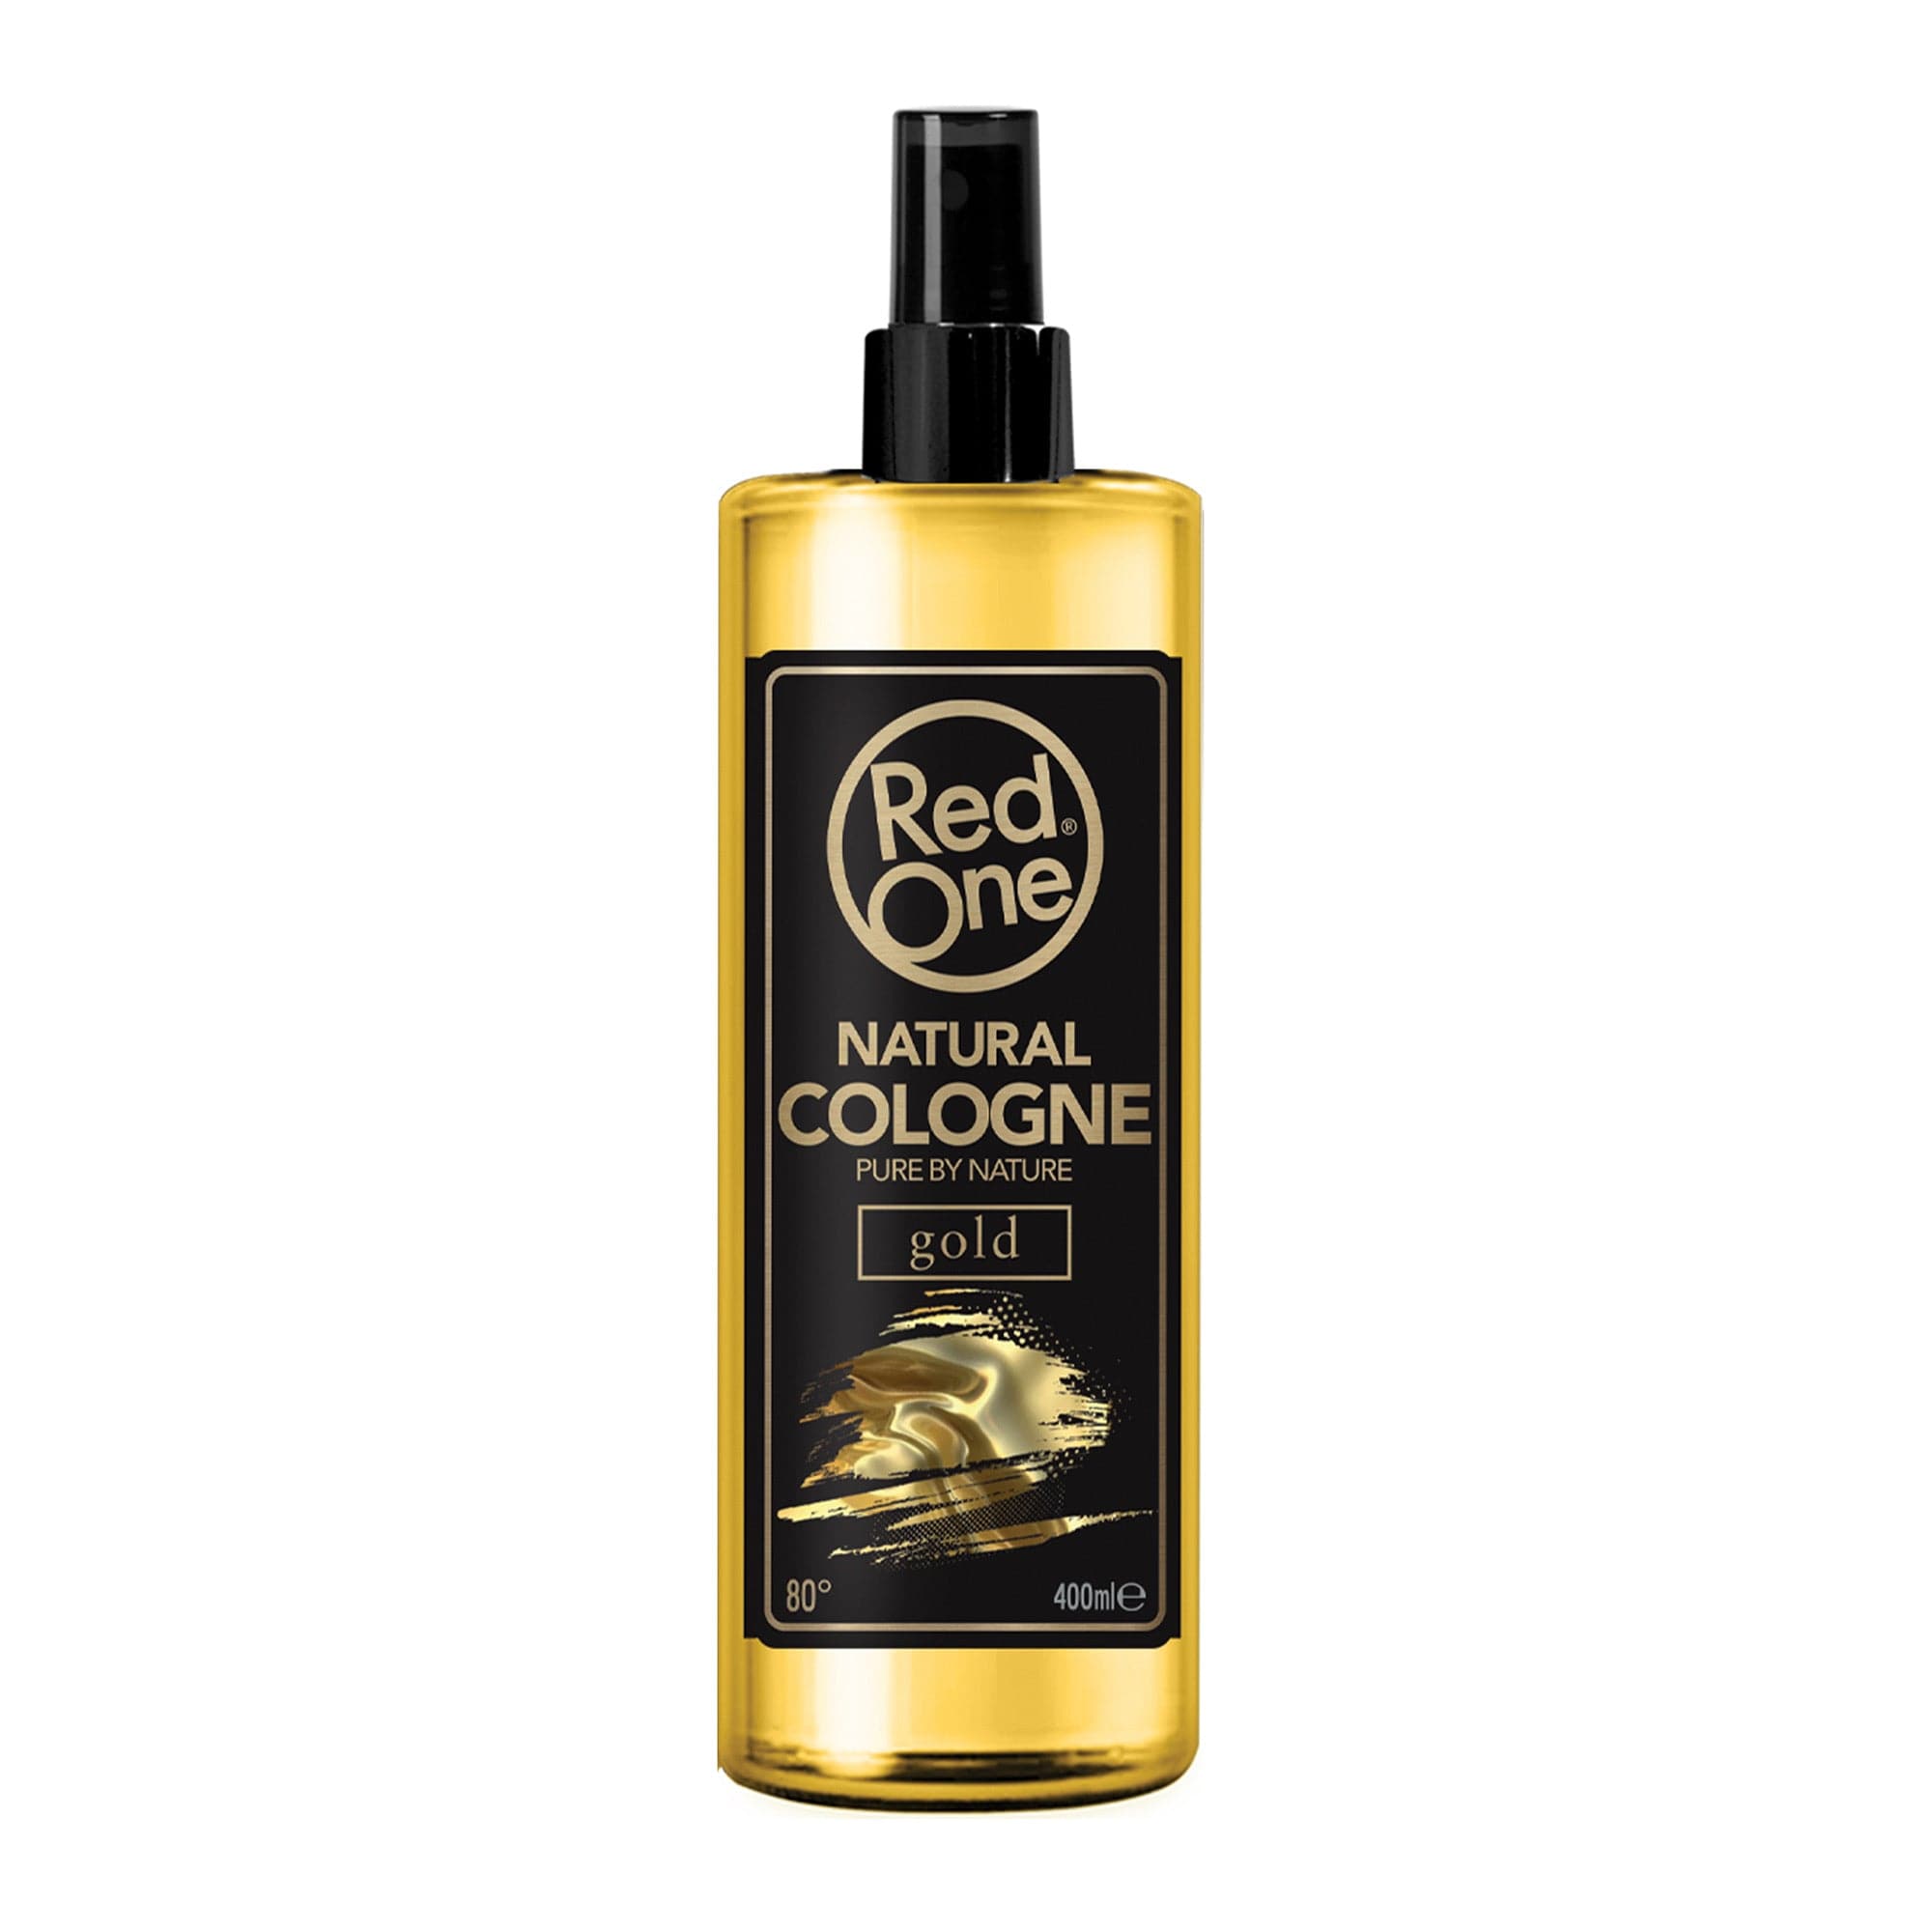 Redone - Natural Cologne Spray Gold 400ml